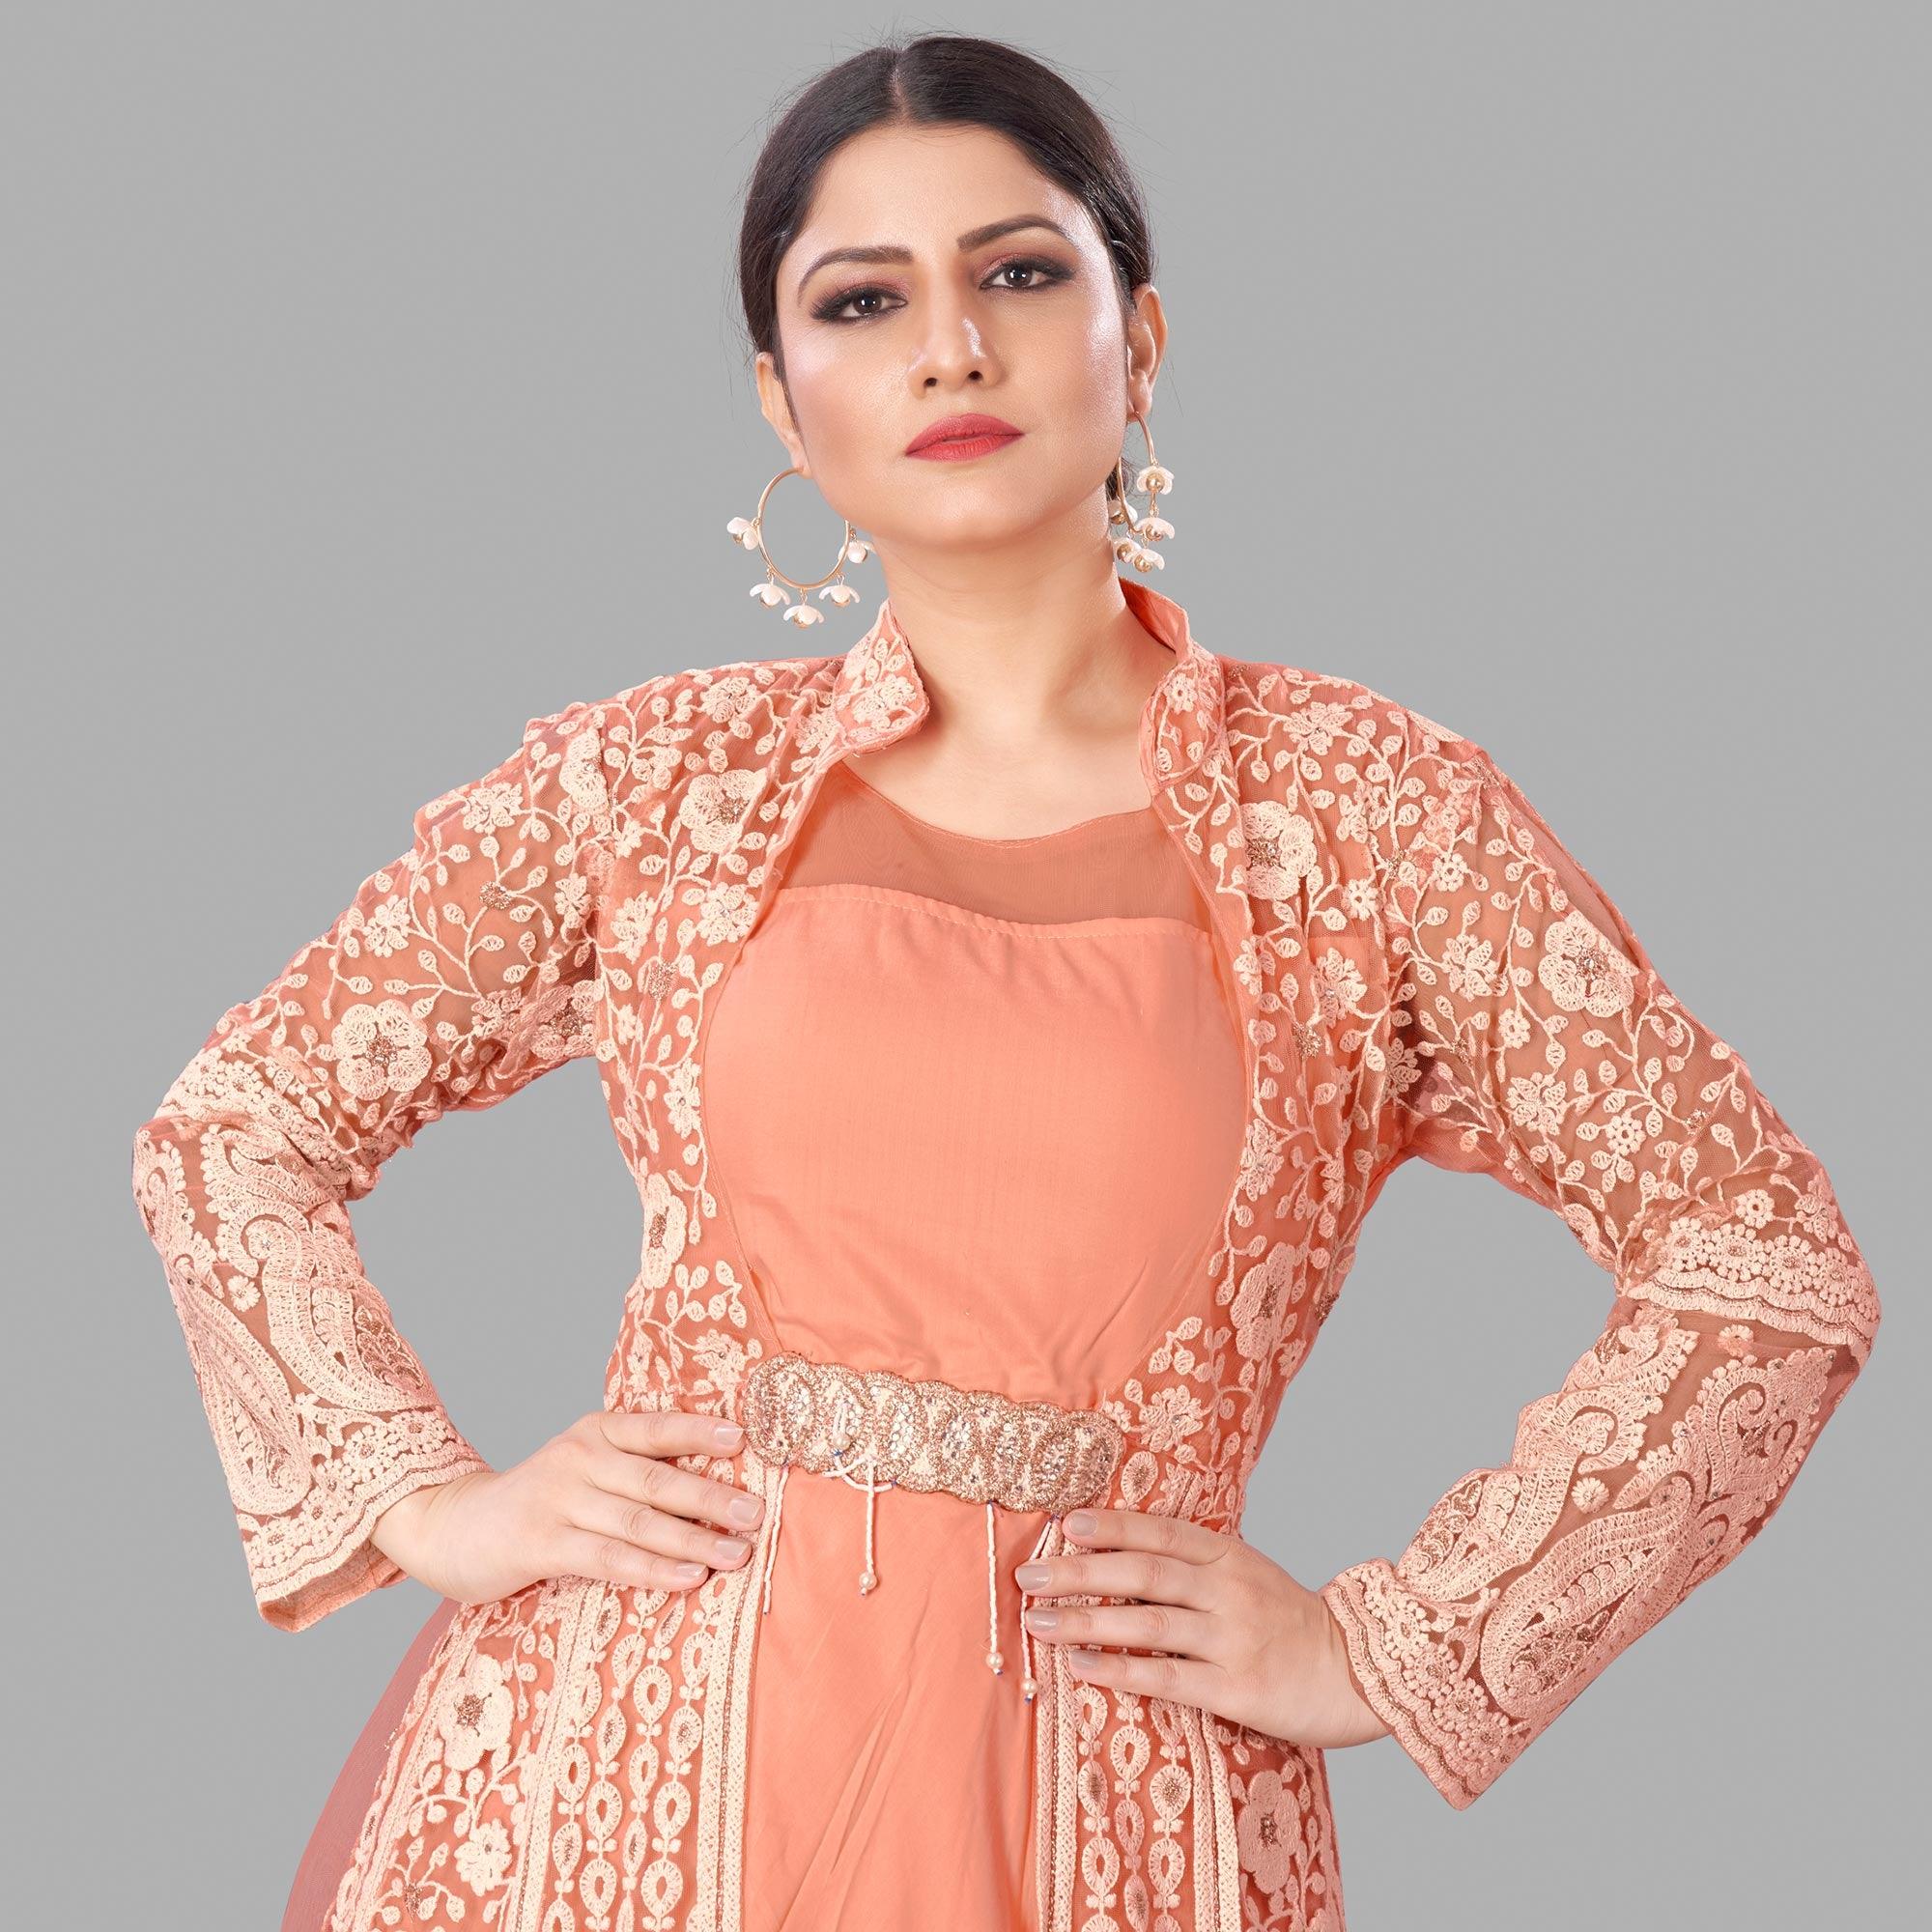 Peach Festive Wear Floral Embroidered Heavy Georgette Floor Length A Line Suit - Peachmode